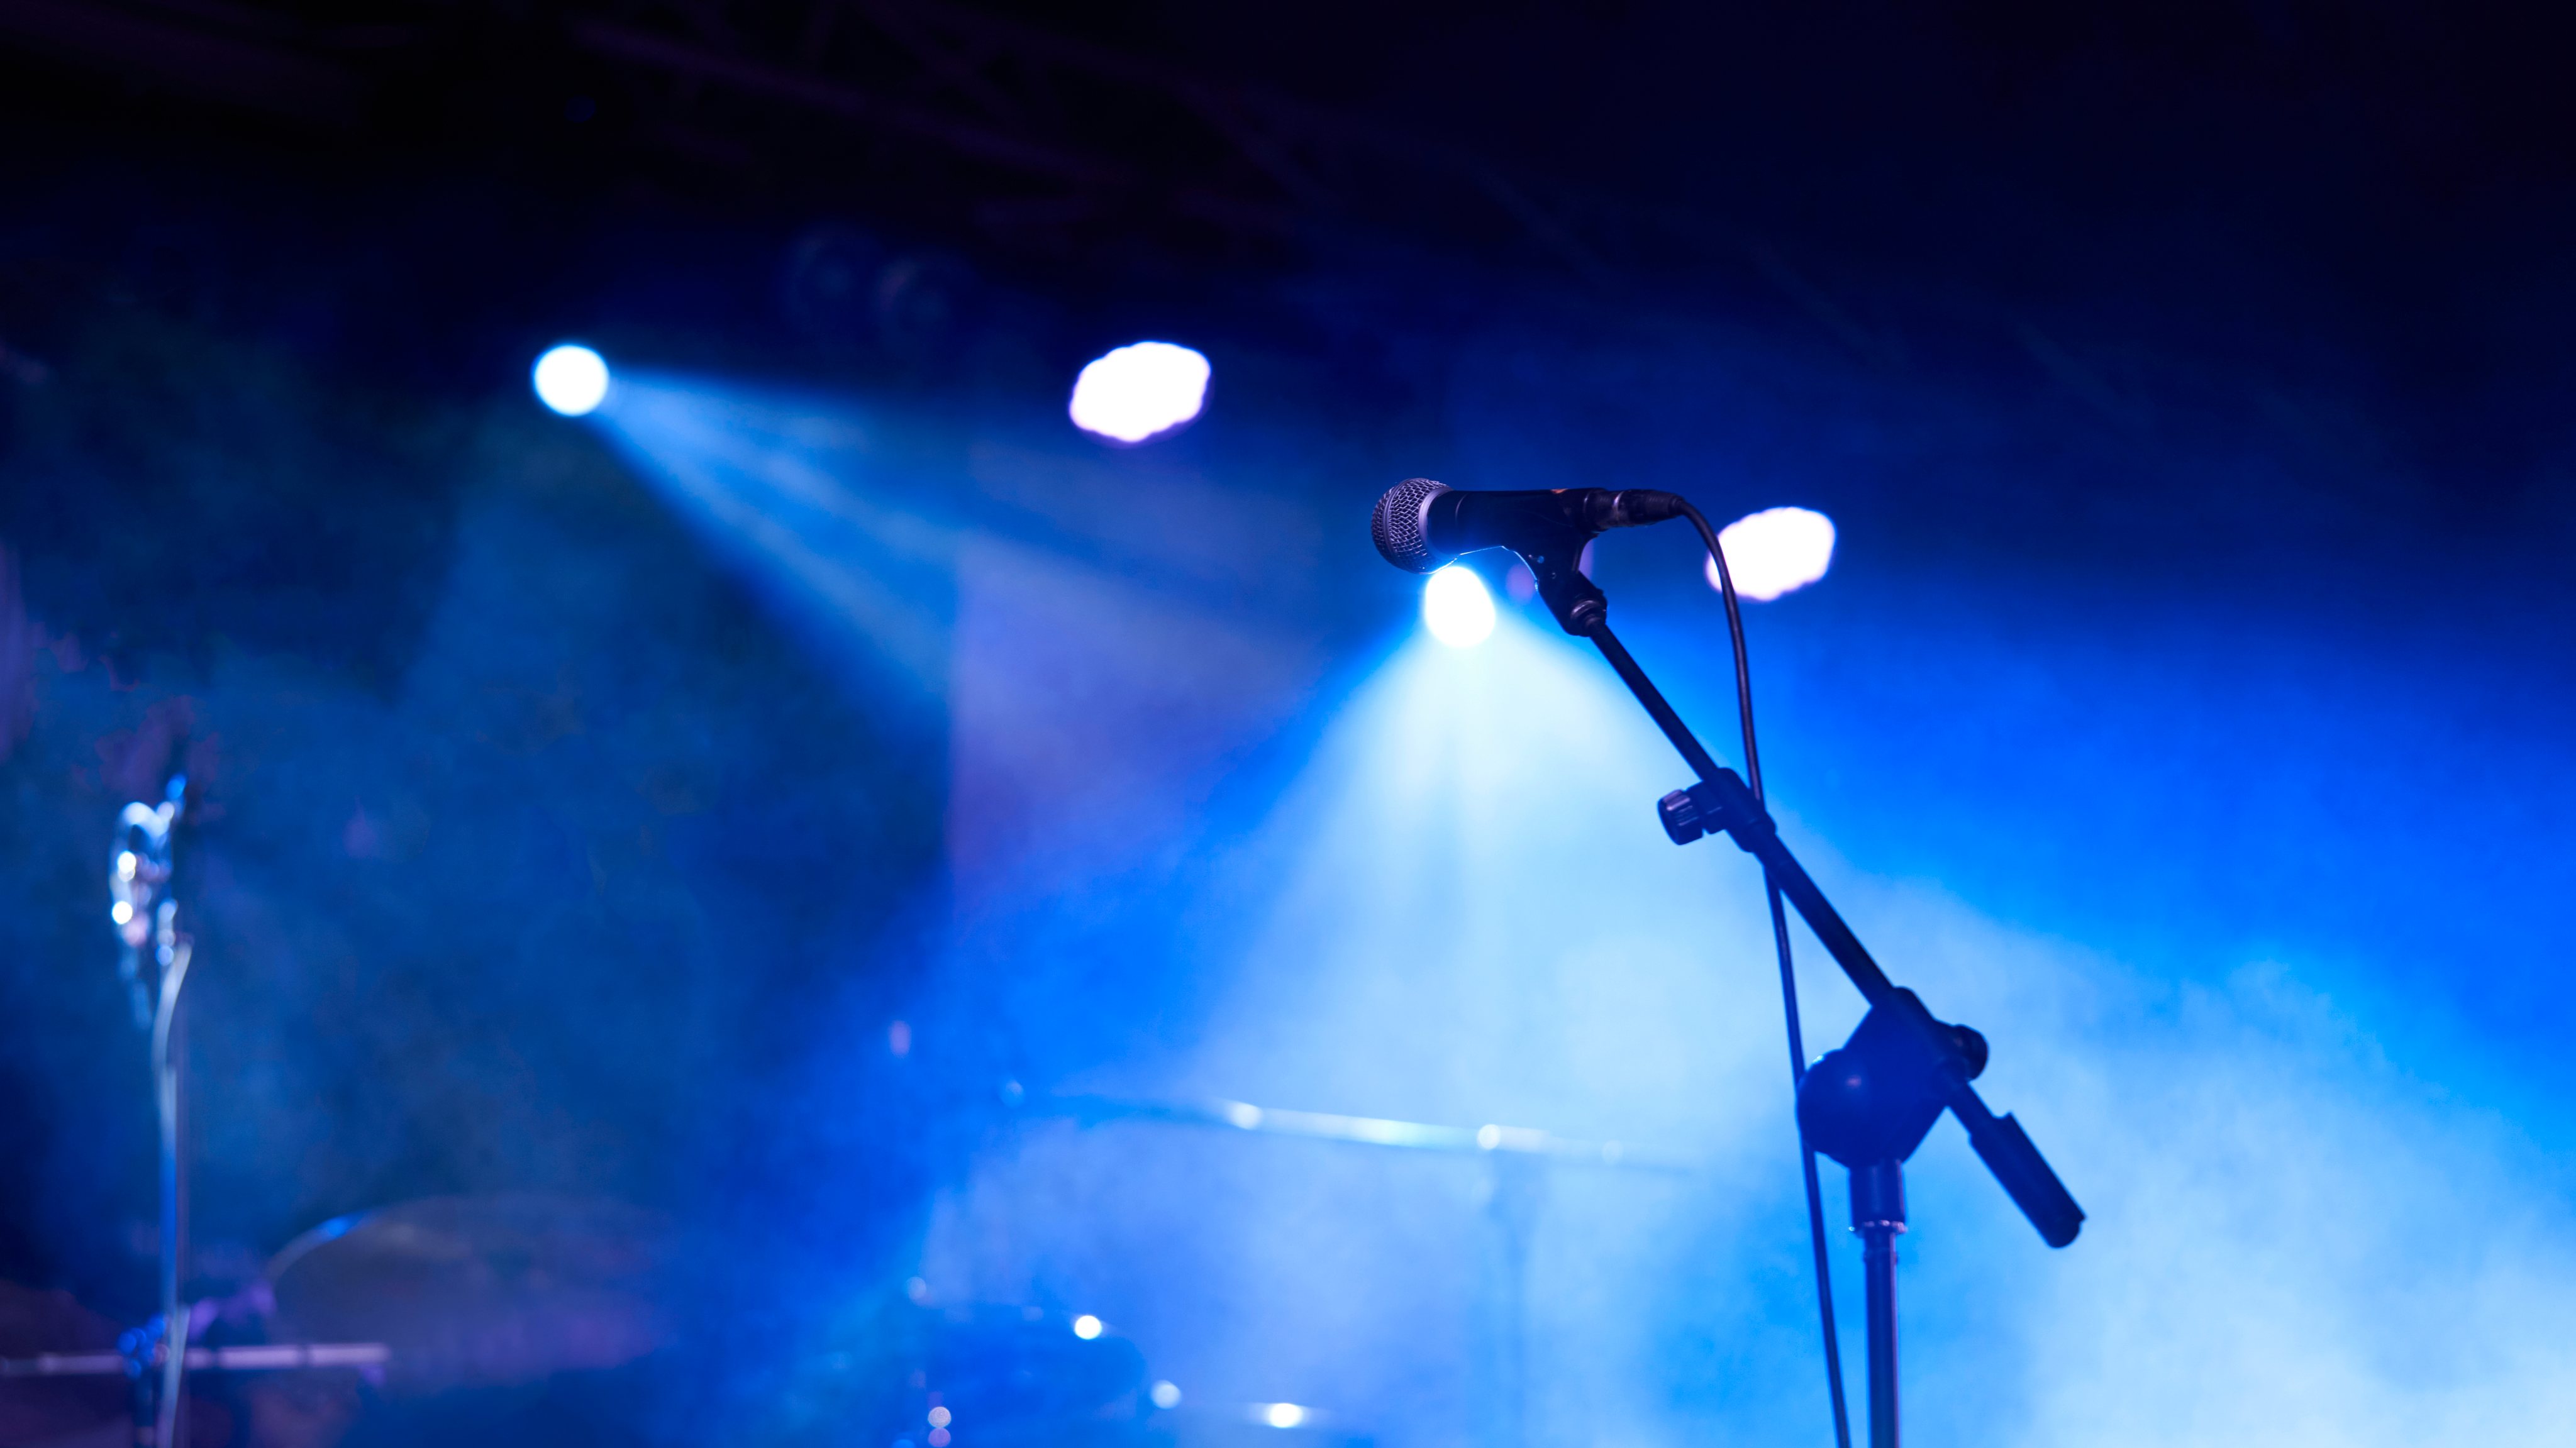 Rear view low angle view of a microphone and spotlights on stage at a live concert with musical instruments background